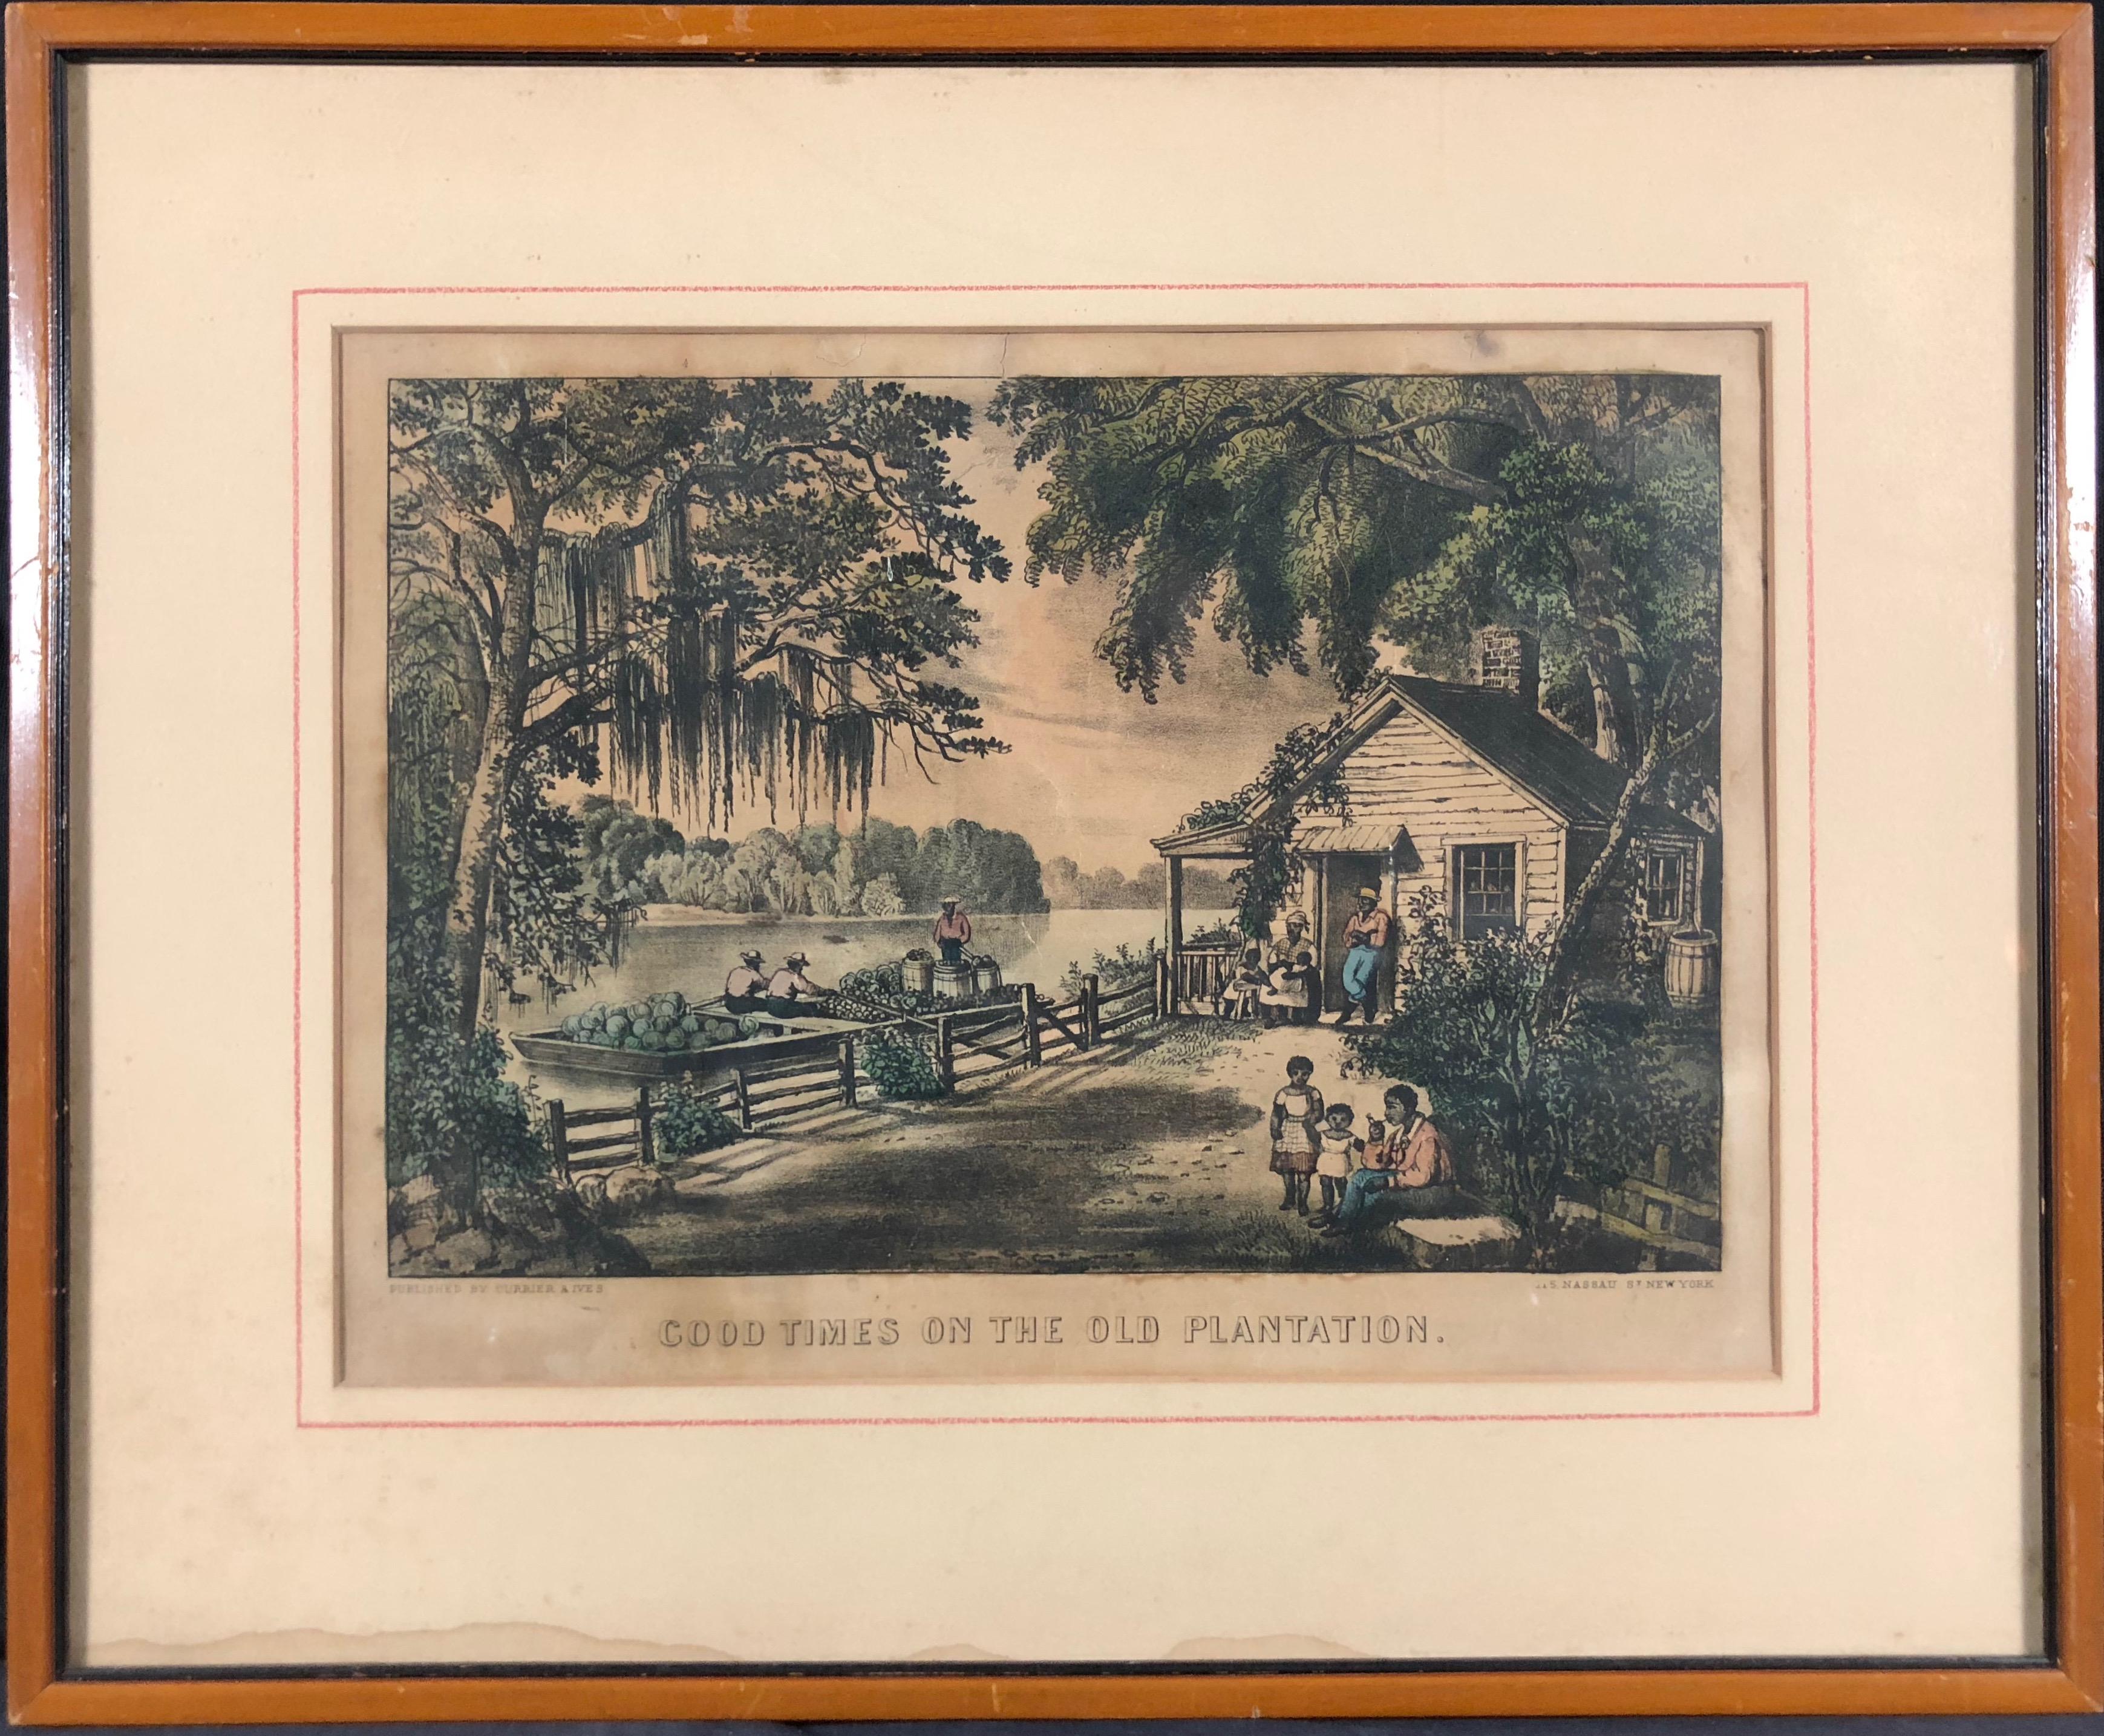 Good Times on the Old Plantation - Print by Currier & Ives